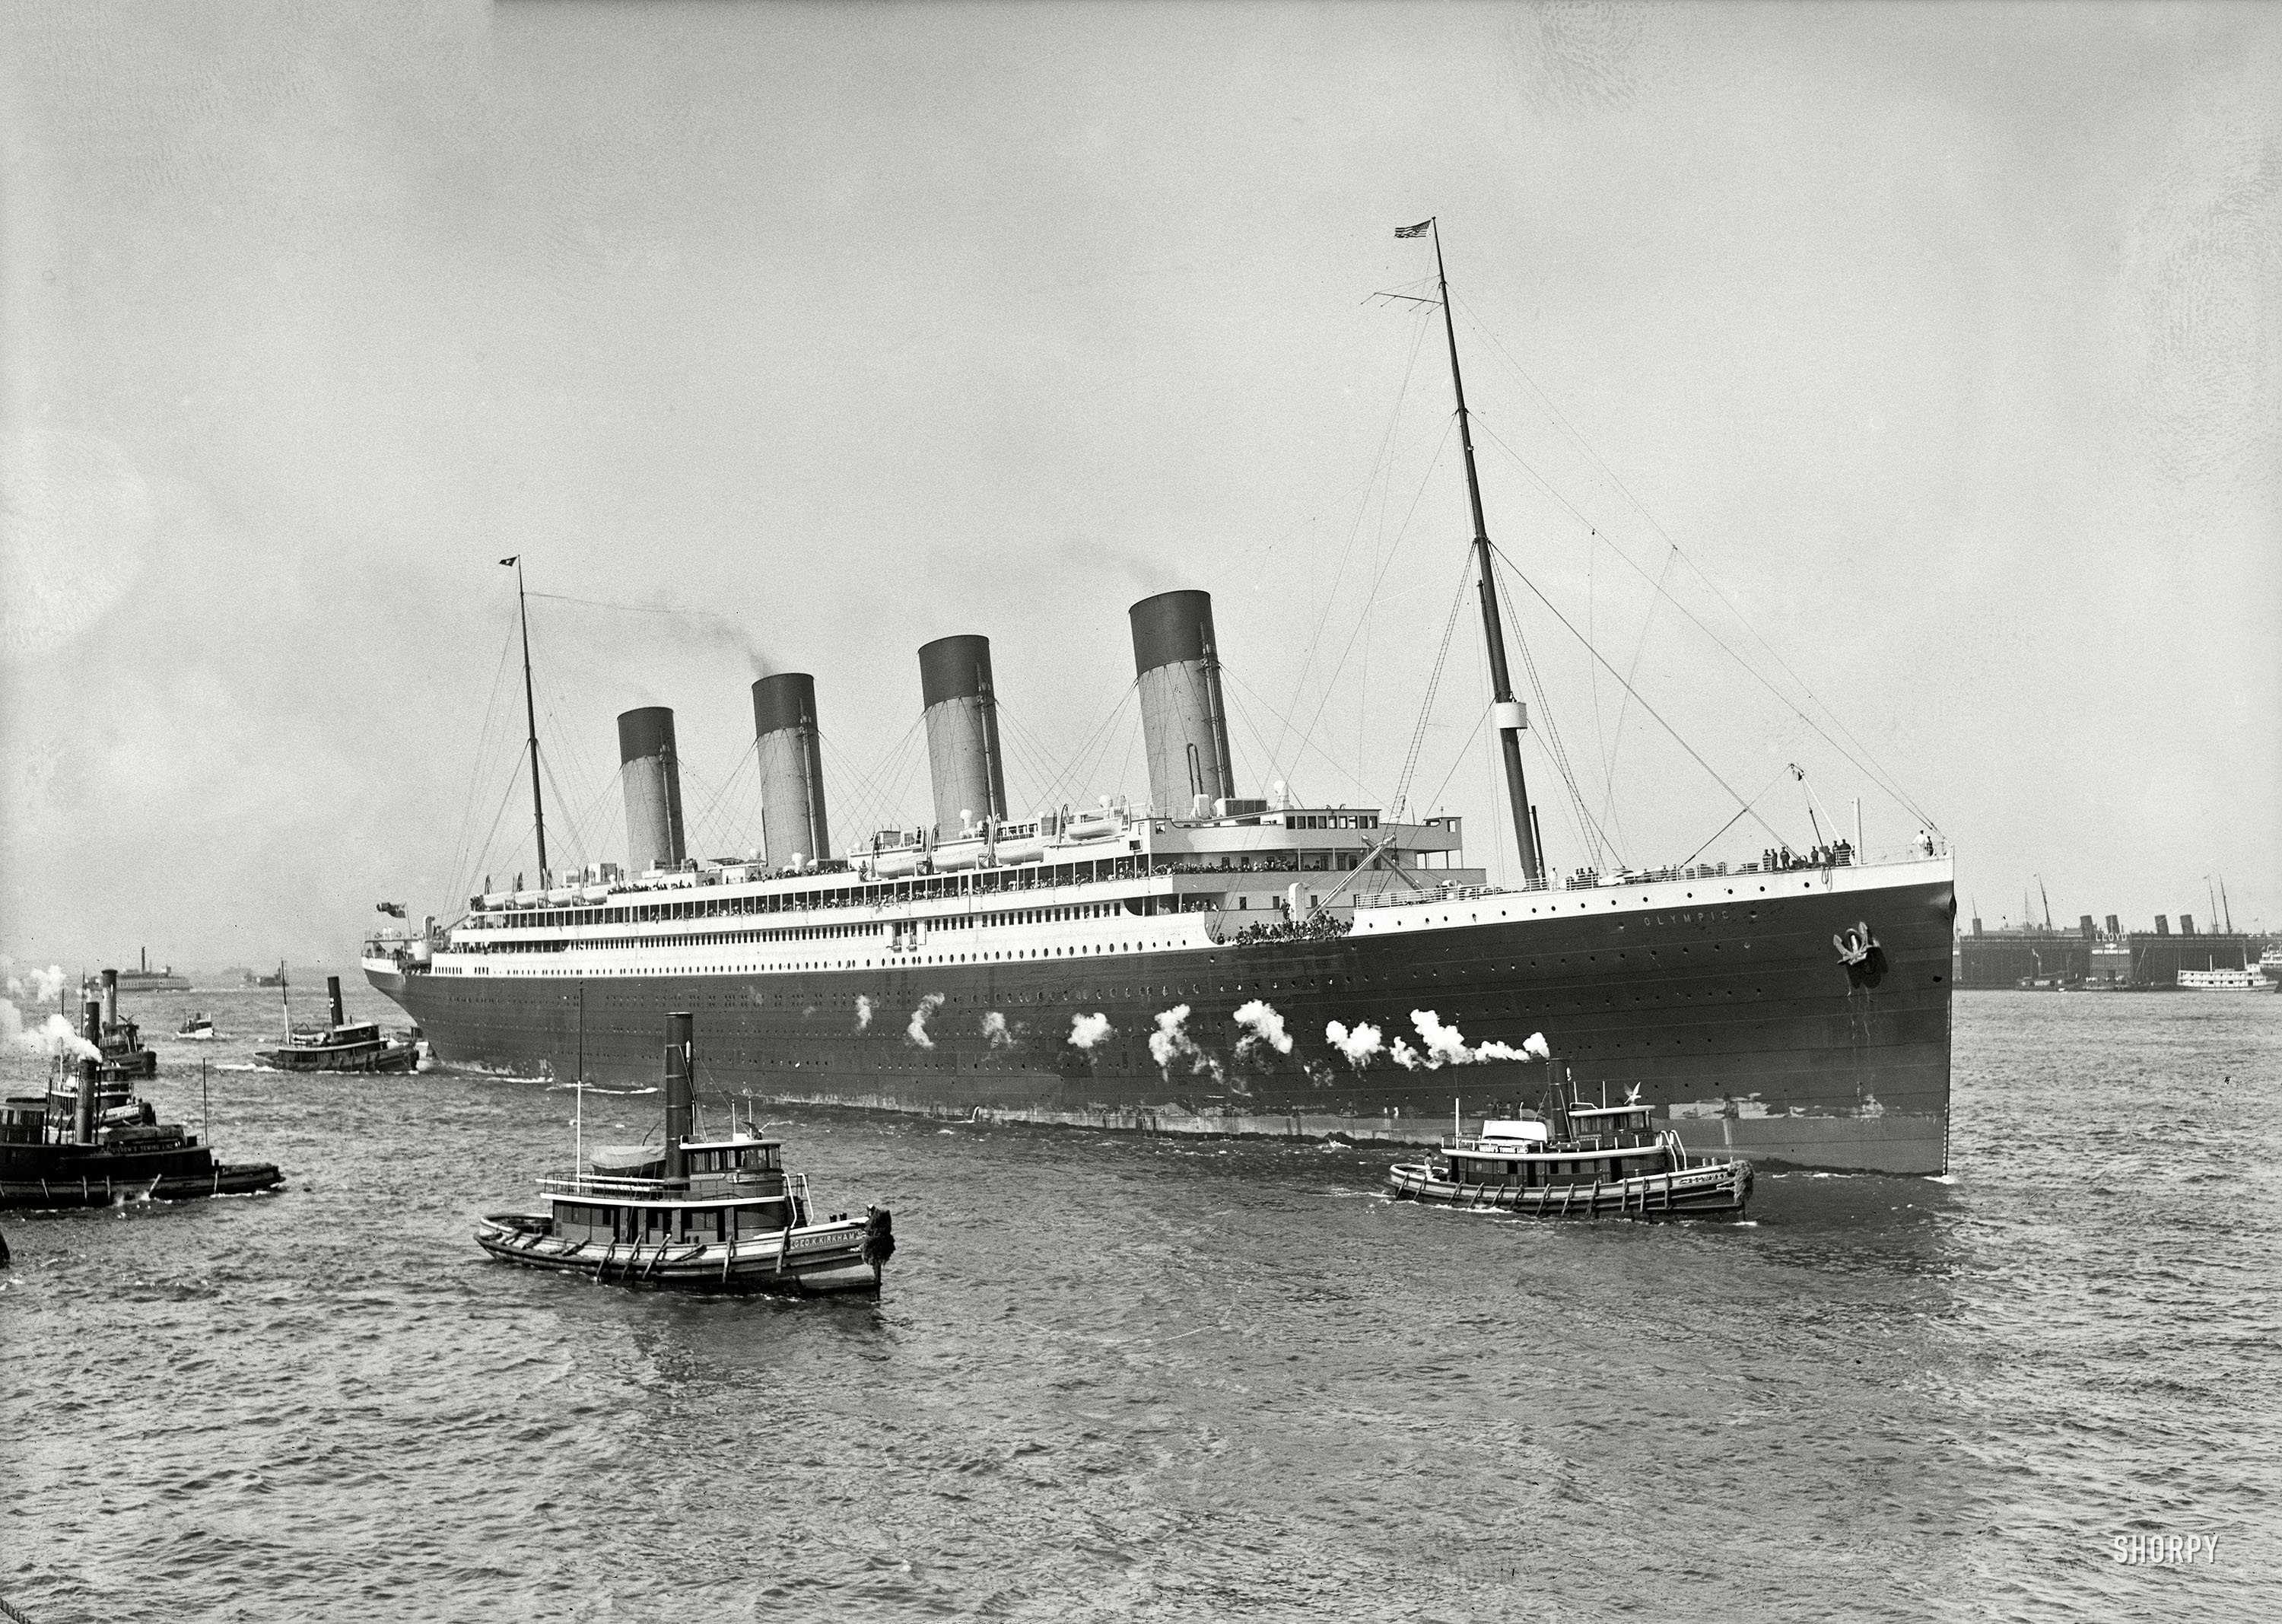 New York. June 21, 1911. "White Star liner S.S. Olympic guided in by tugboats Geo. K. Kirkham and Downer." Detroit Publishing glass negative. View full size.